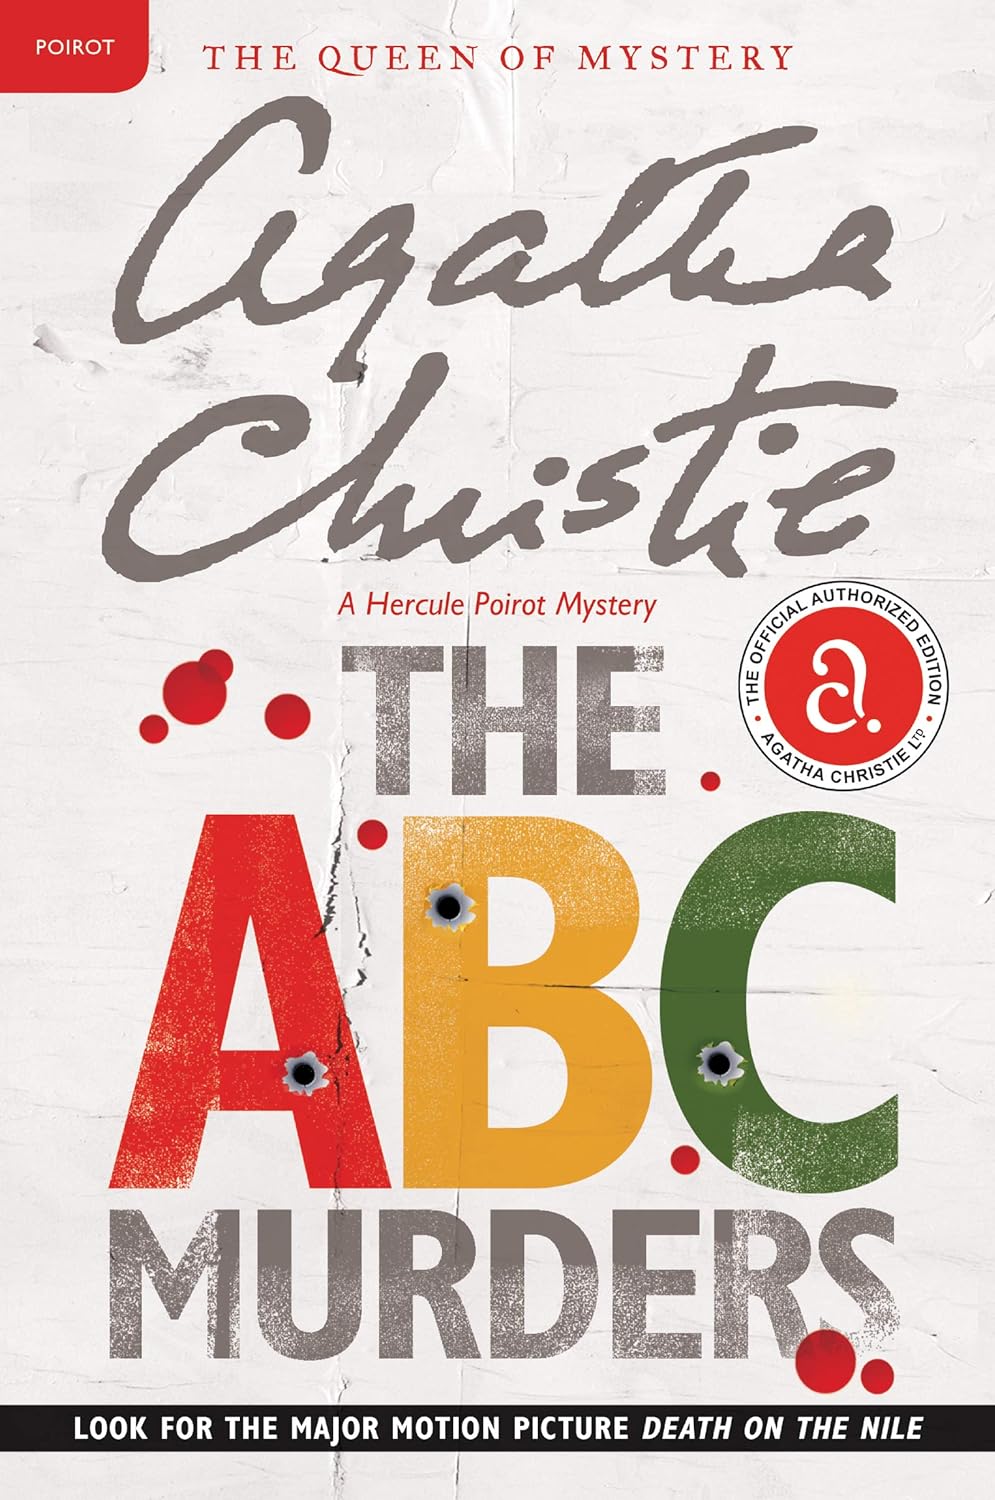 Cover of 'The ABC Murders' by Agatha Christie. The title appears in bold, vibrant colors, set against a crumpled white paper backdrop, with bullet holes piercing the letters ‘A,’ ‘B,’ and ‘C’ in ‘ABC.’ Above the title, the author’s name elegantly scripted in cursive adds an air of mystery.